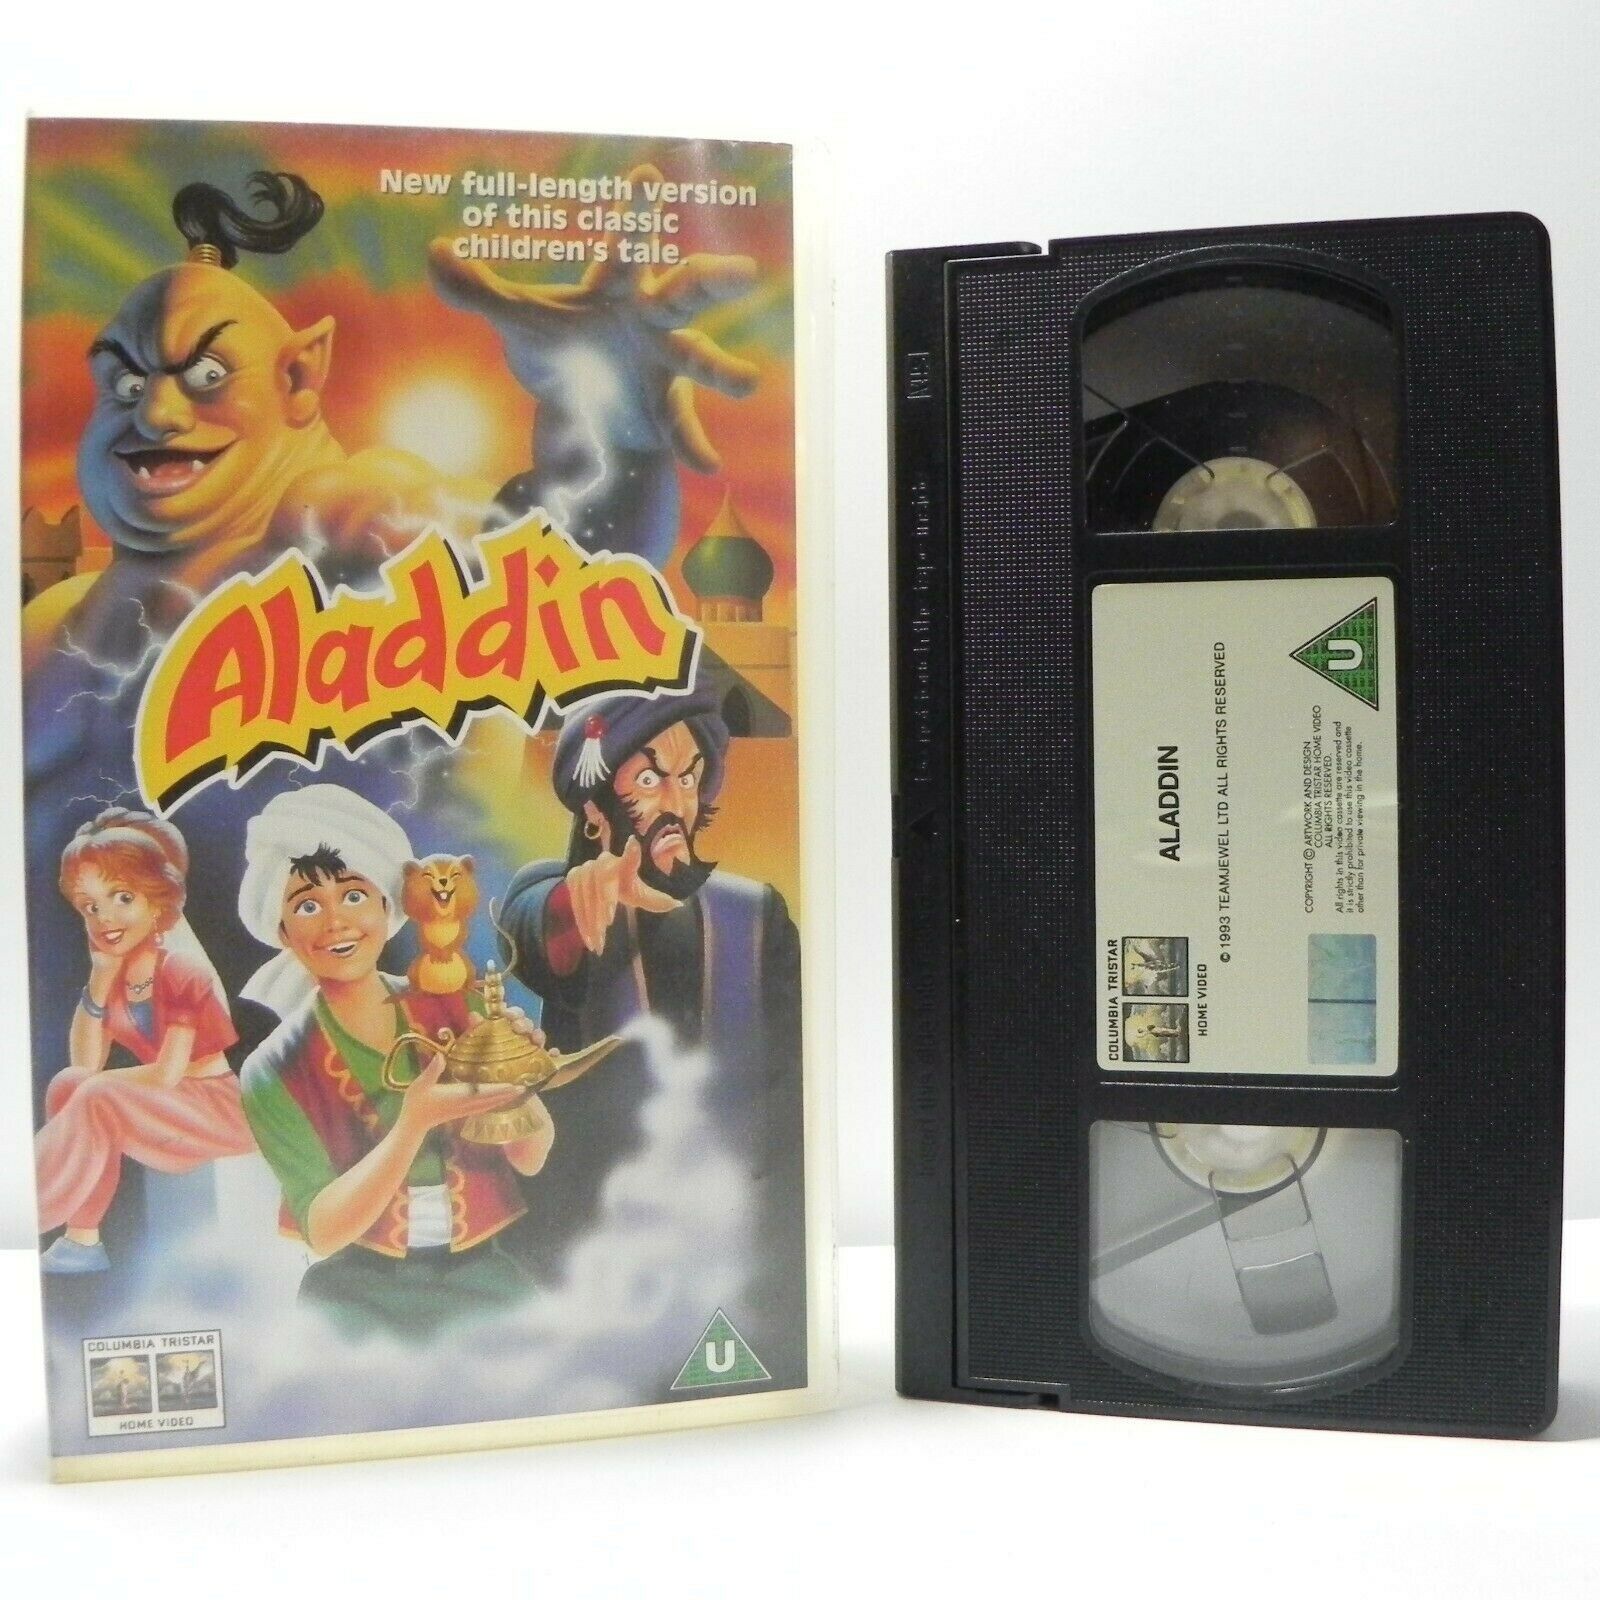 Aladdin - Animated - New Version - Classic Children's Tale - Magical Story - VHS-